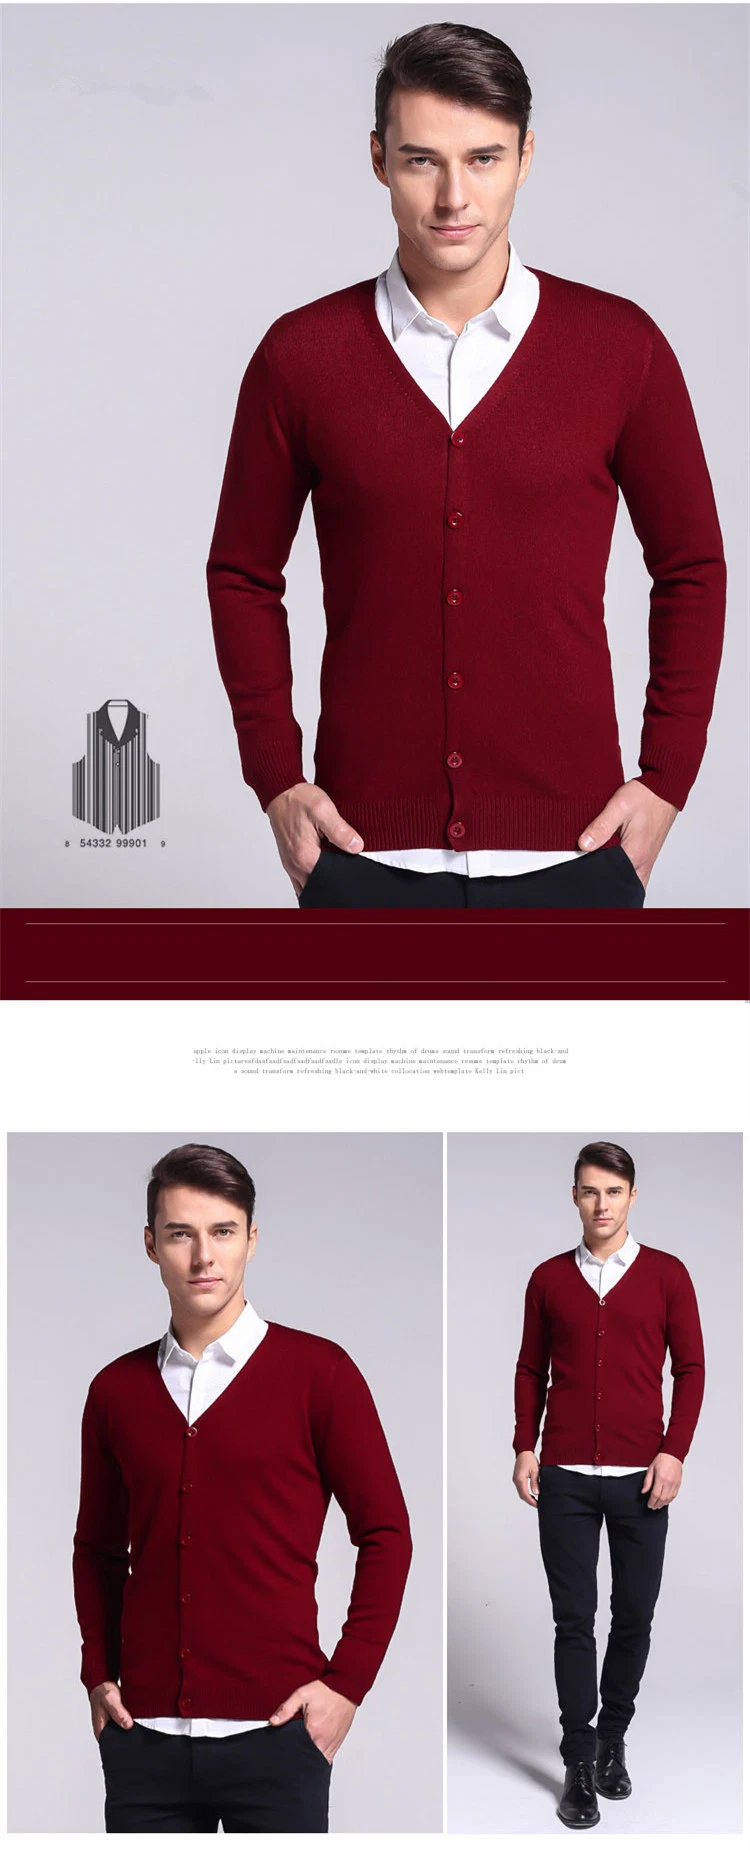 Hot Selling Cheap Price Men&prime;s Cashmere Cardigan V-Neck Solid Color Large Size Slim Fit Long-Sleeved Office Business Sweater/Sweaters/Jerseys/Coat